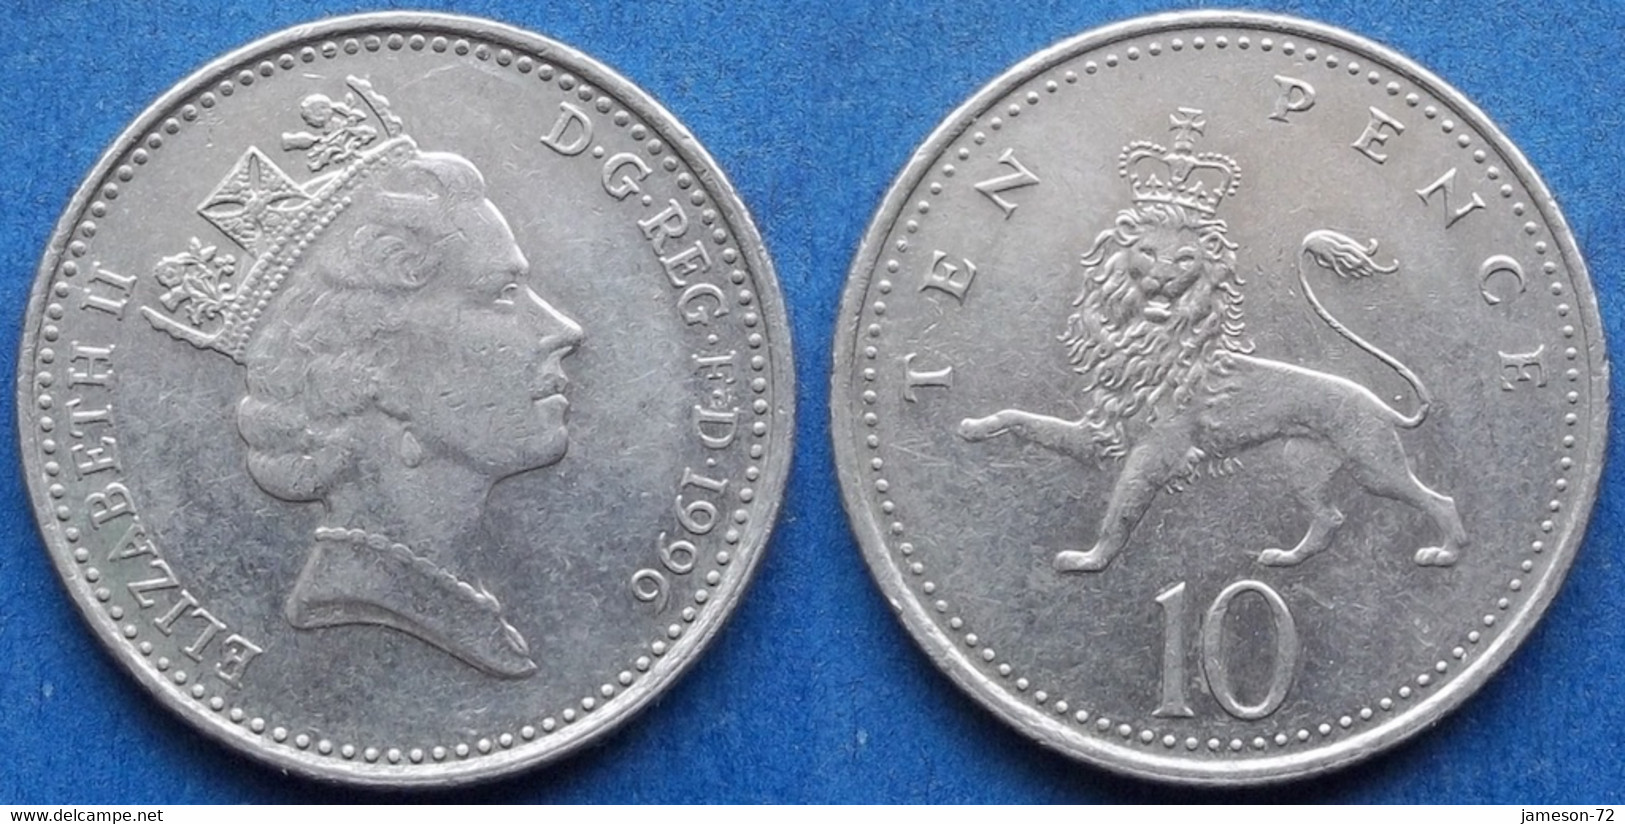 UK - 10 Pence 1996 "Crowned Lion" KM# 938b Elizabeth II Decimal Coinage (1971-2022) - Edelweiss Coins - 10 Pence & 10 New Pence